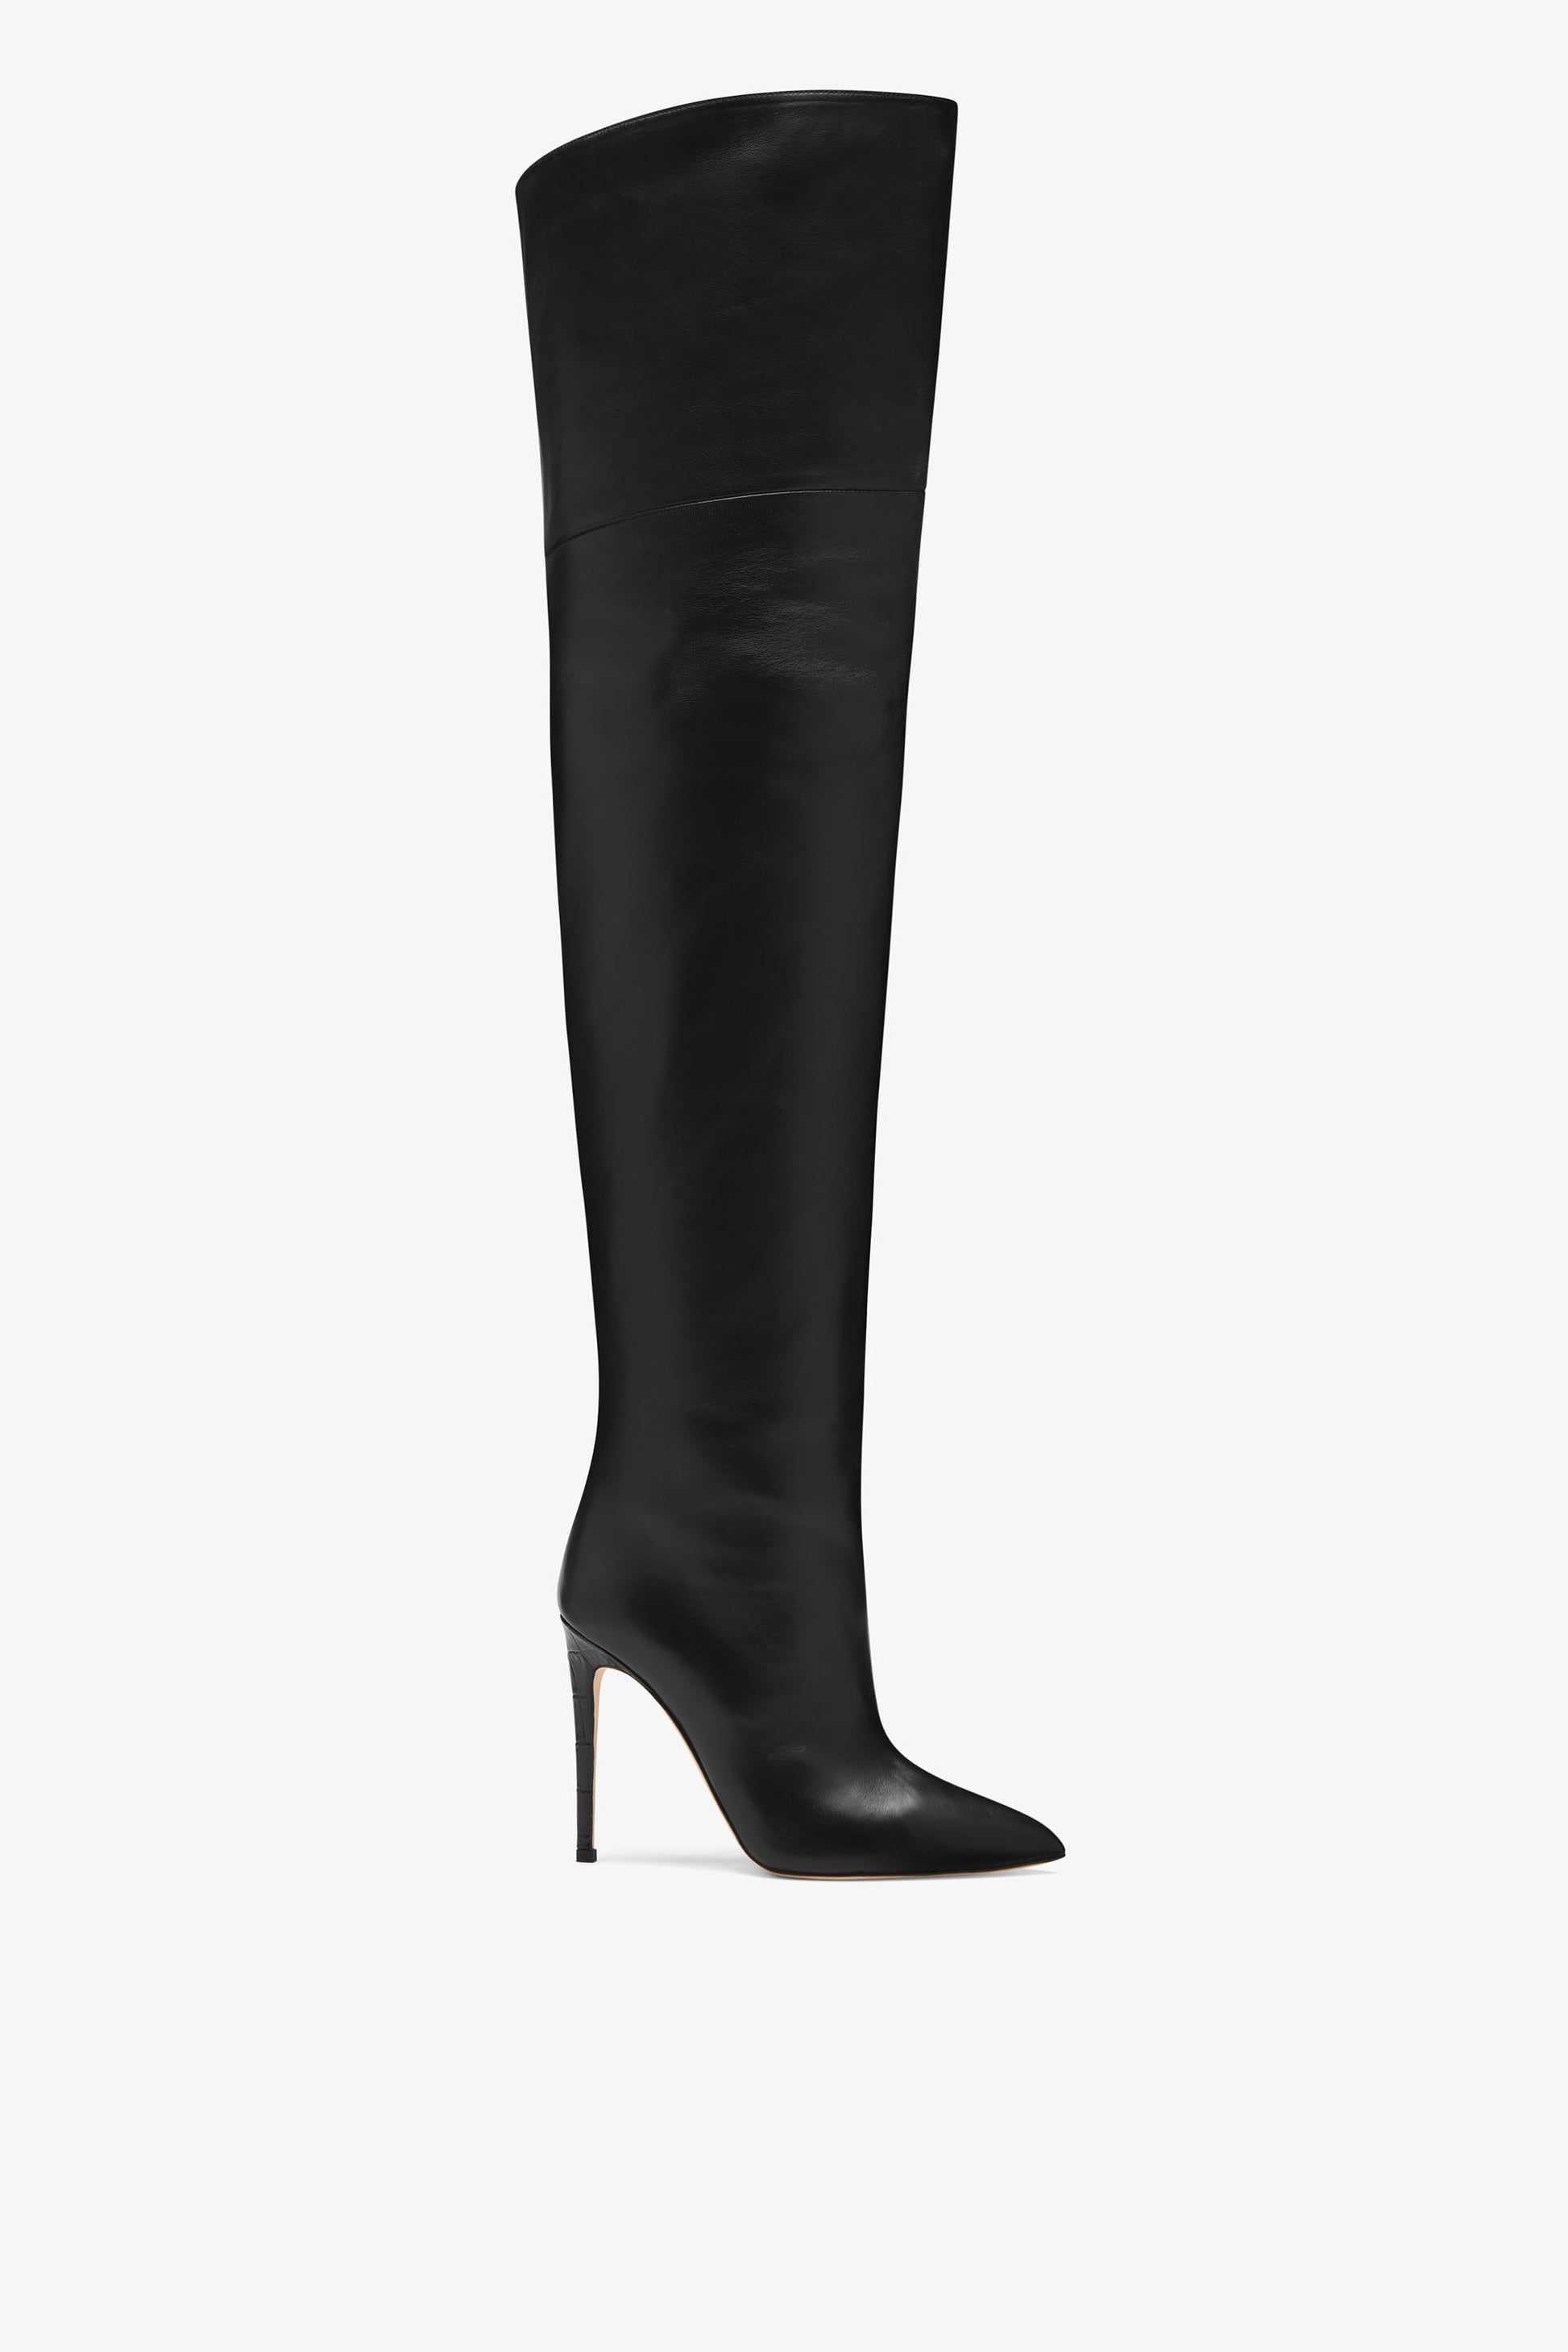 Black nappa leather stiletto over the knee boots